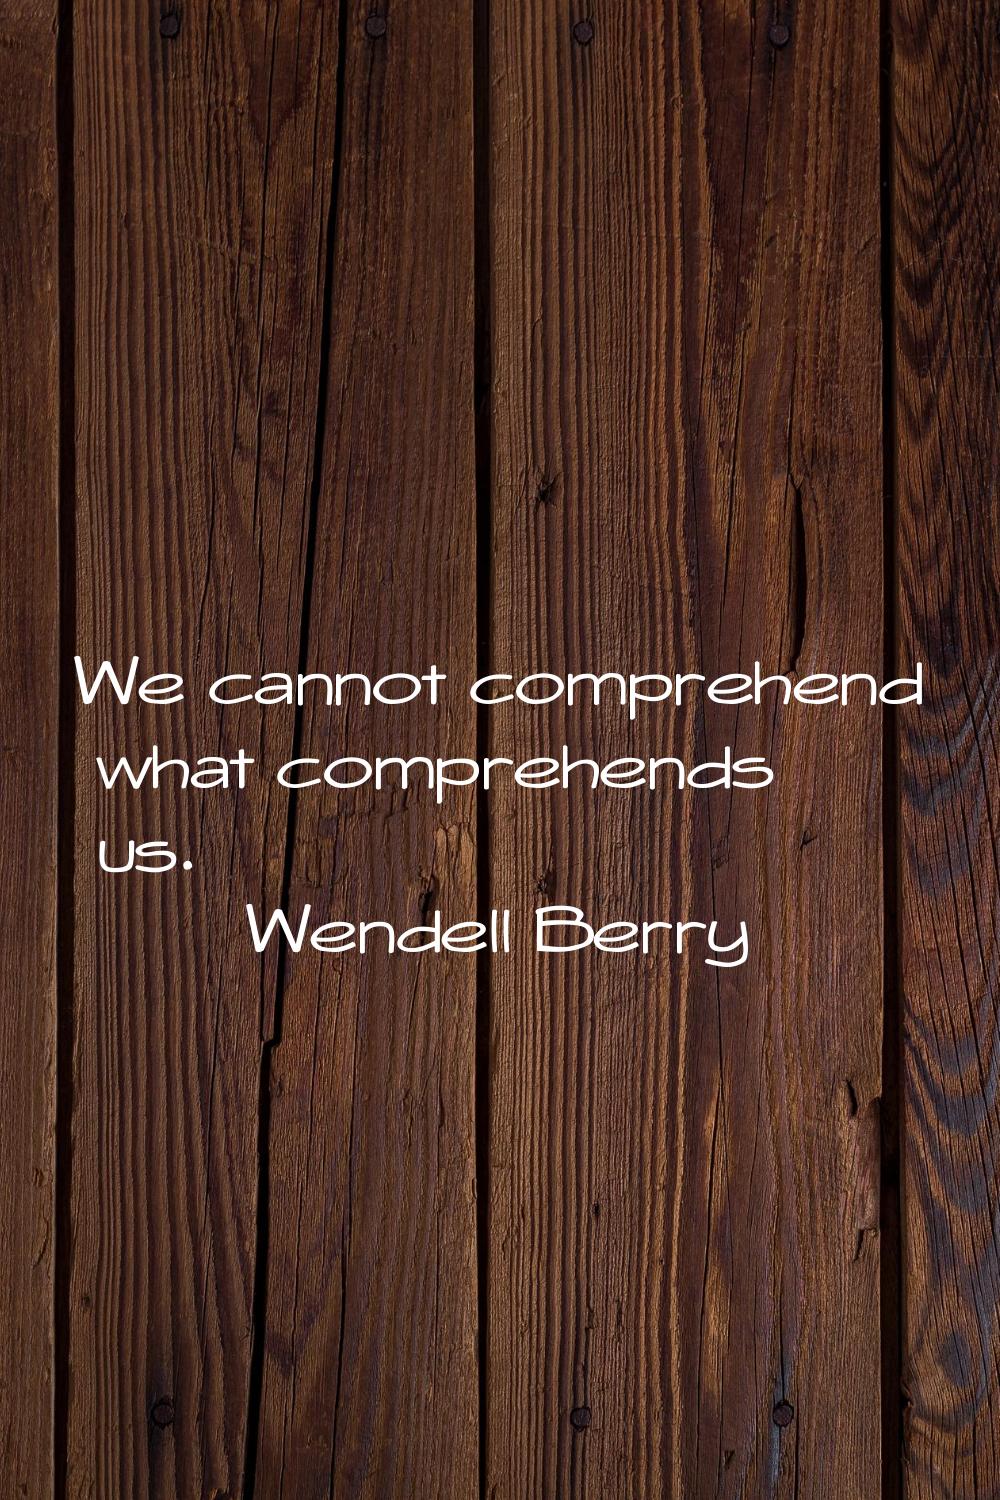 We cannot comprehend what comprehends us.